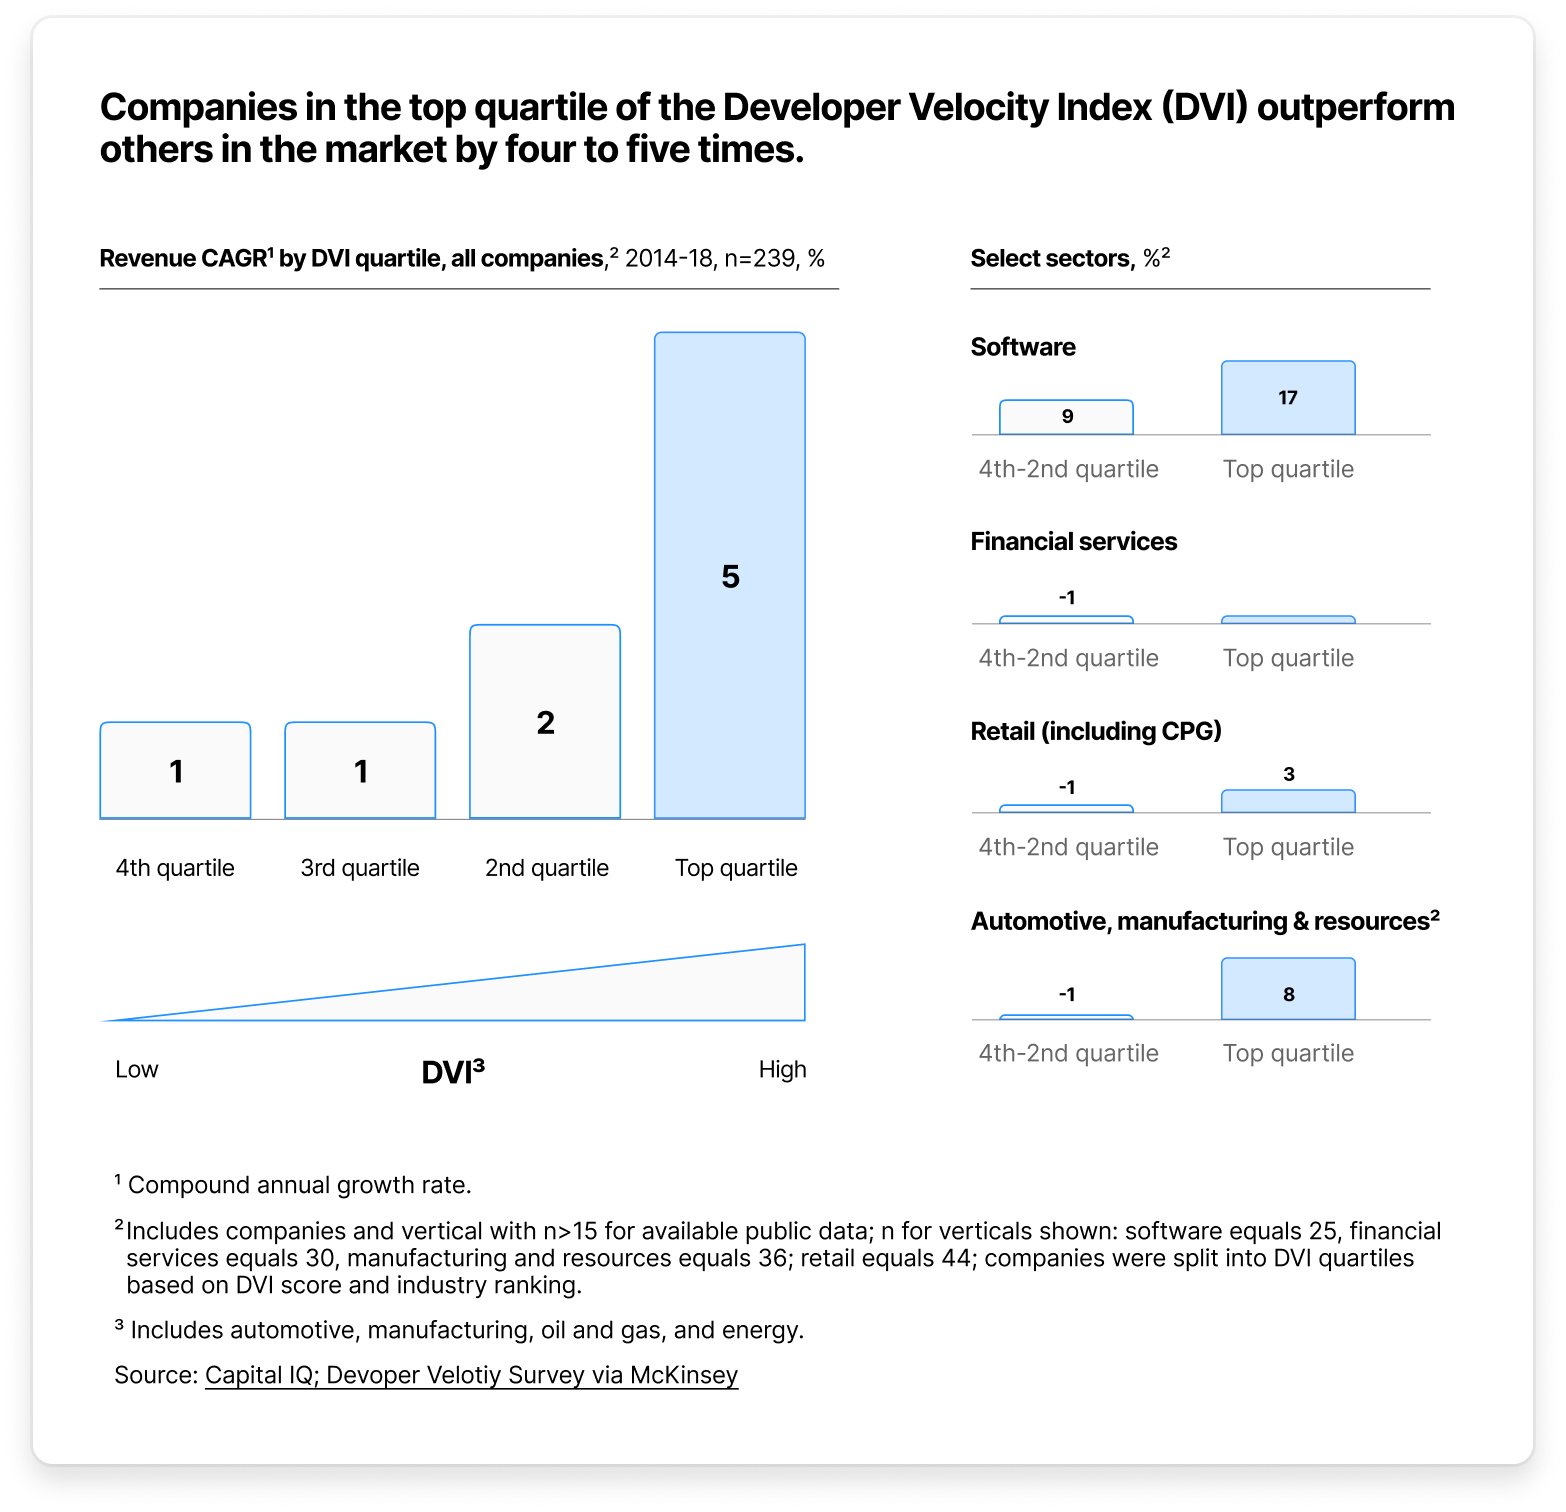 McKinsey’s Developer Velocity Index (DVI) quantifies the impact of developer velocity on an organization's performance. Their research found that companies with high DVI scores were more likely to achieve better business outcomes, including faster revenue growth, higher levels of innovation, and improved customer satisfaction.